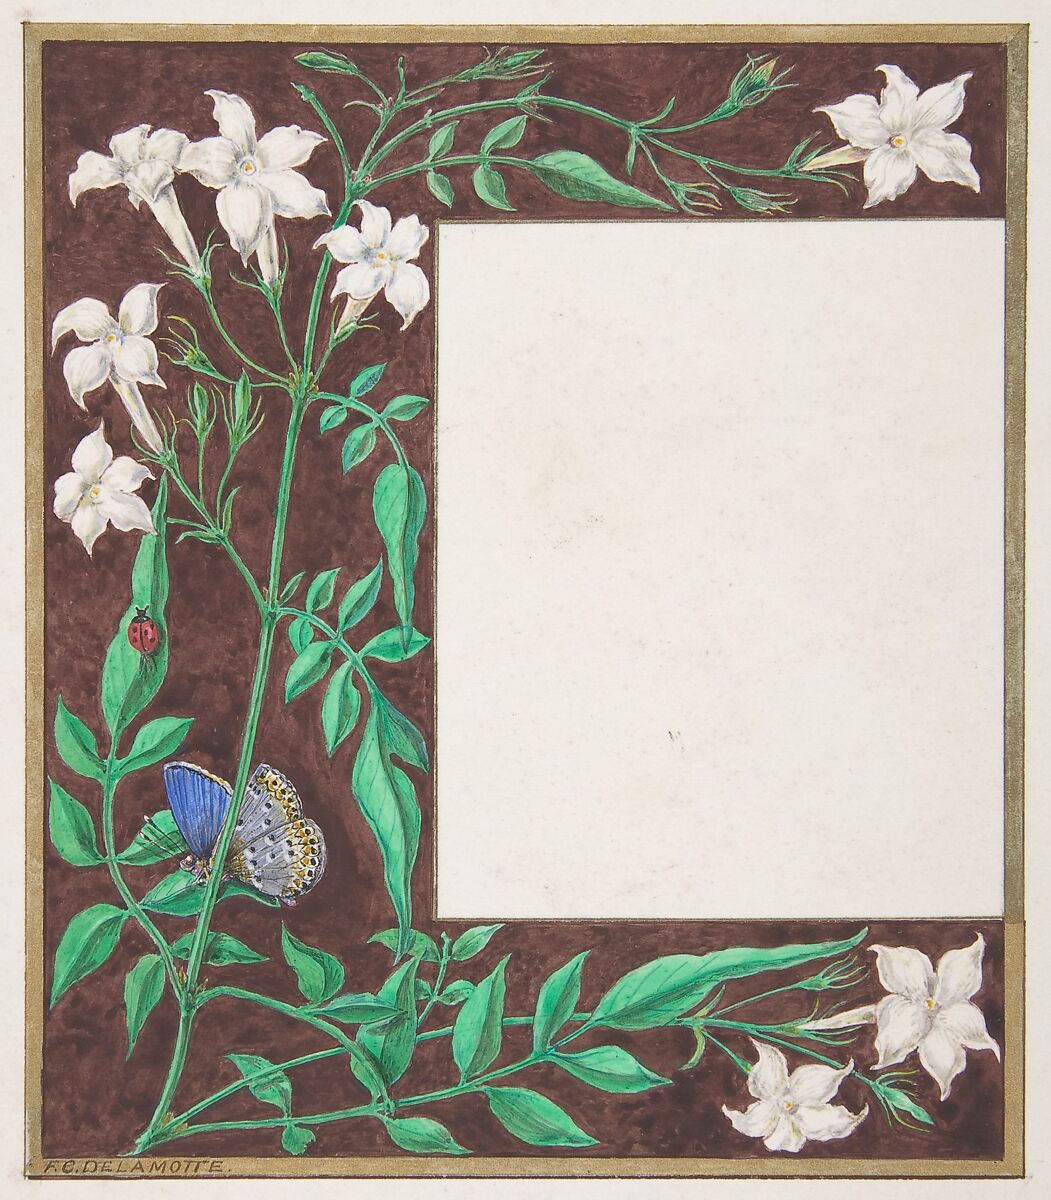 Floral Border Design, Freeman Gage Delamotte (British, Sandhurst 1813/14–1862 London), Watercolor over pen and brown ink with touches of gold and gouache (bodycolor) 